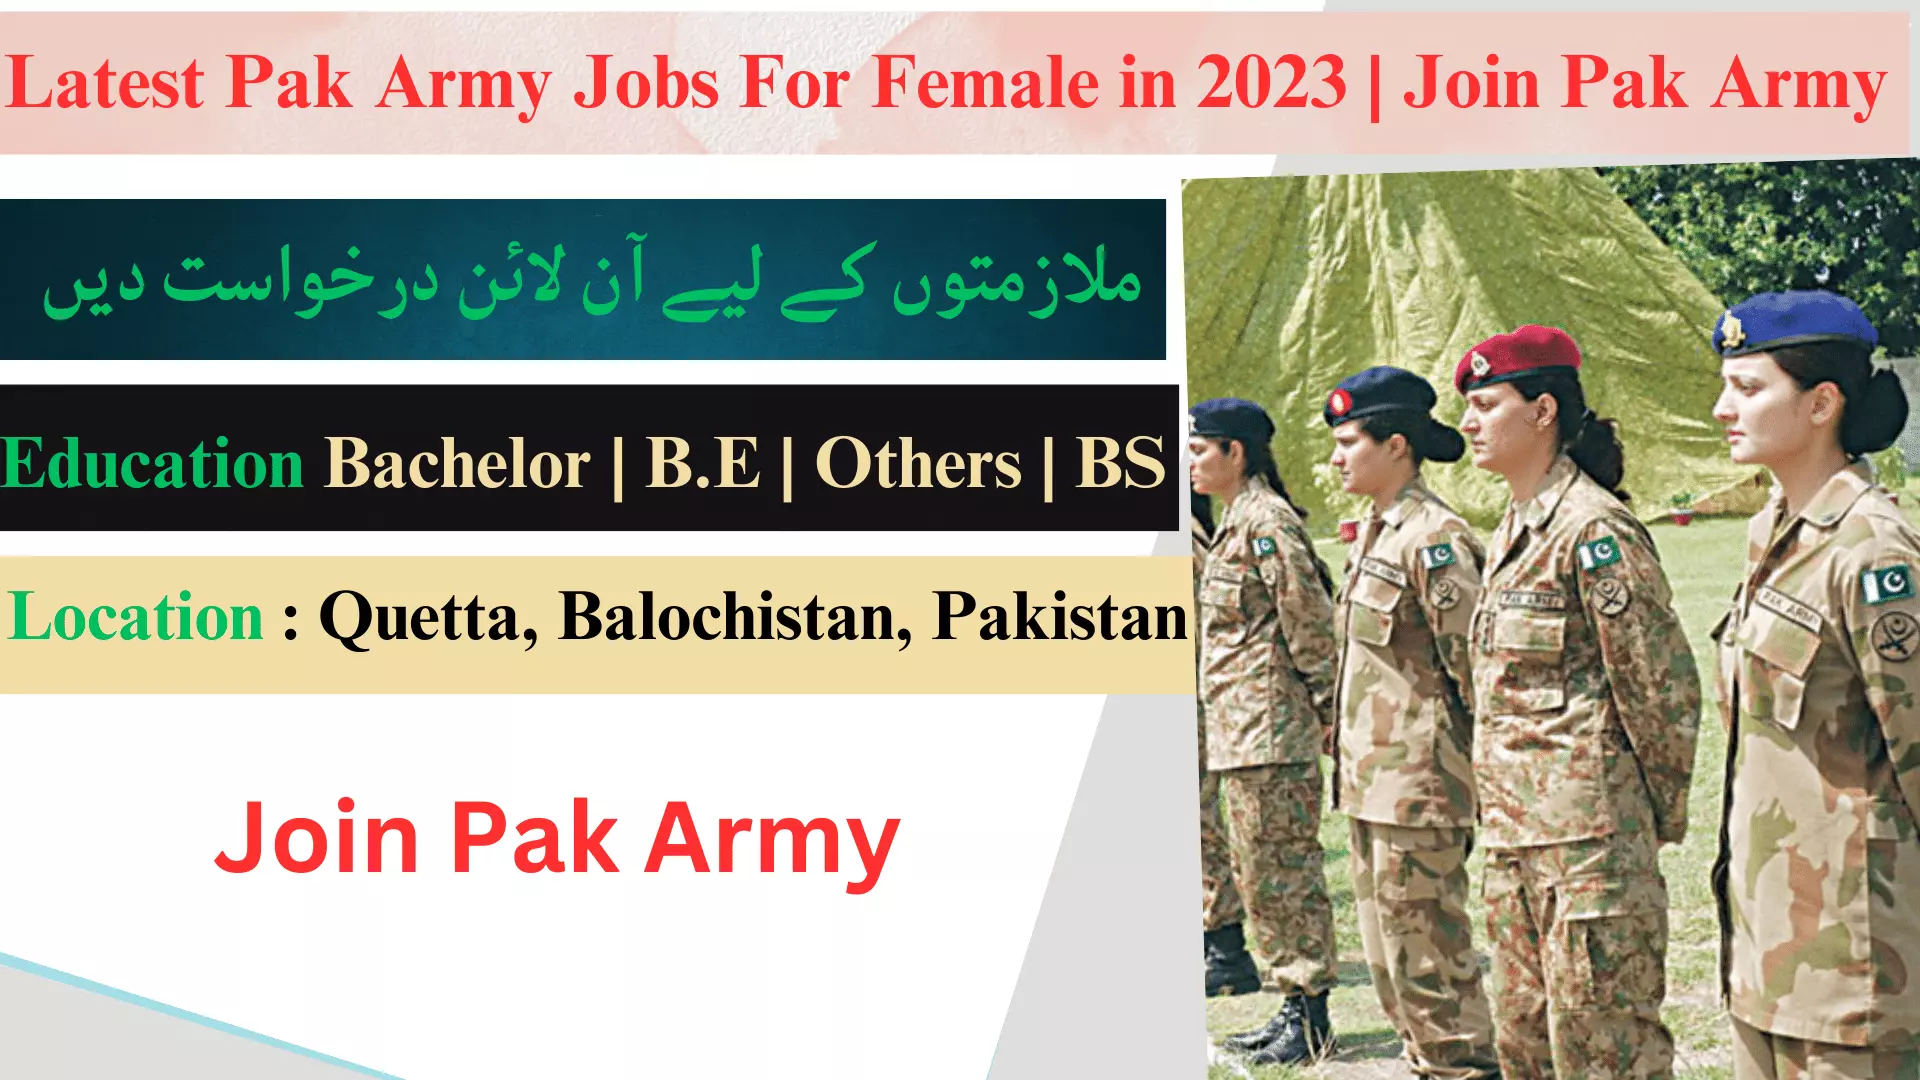 Latest Pak Army Jobs For Female in 2023 | Join Pak Army